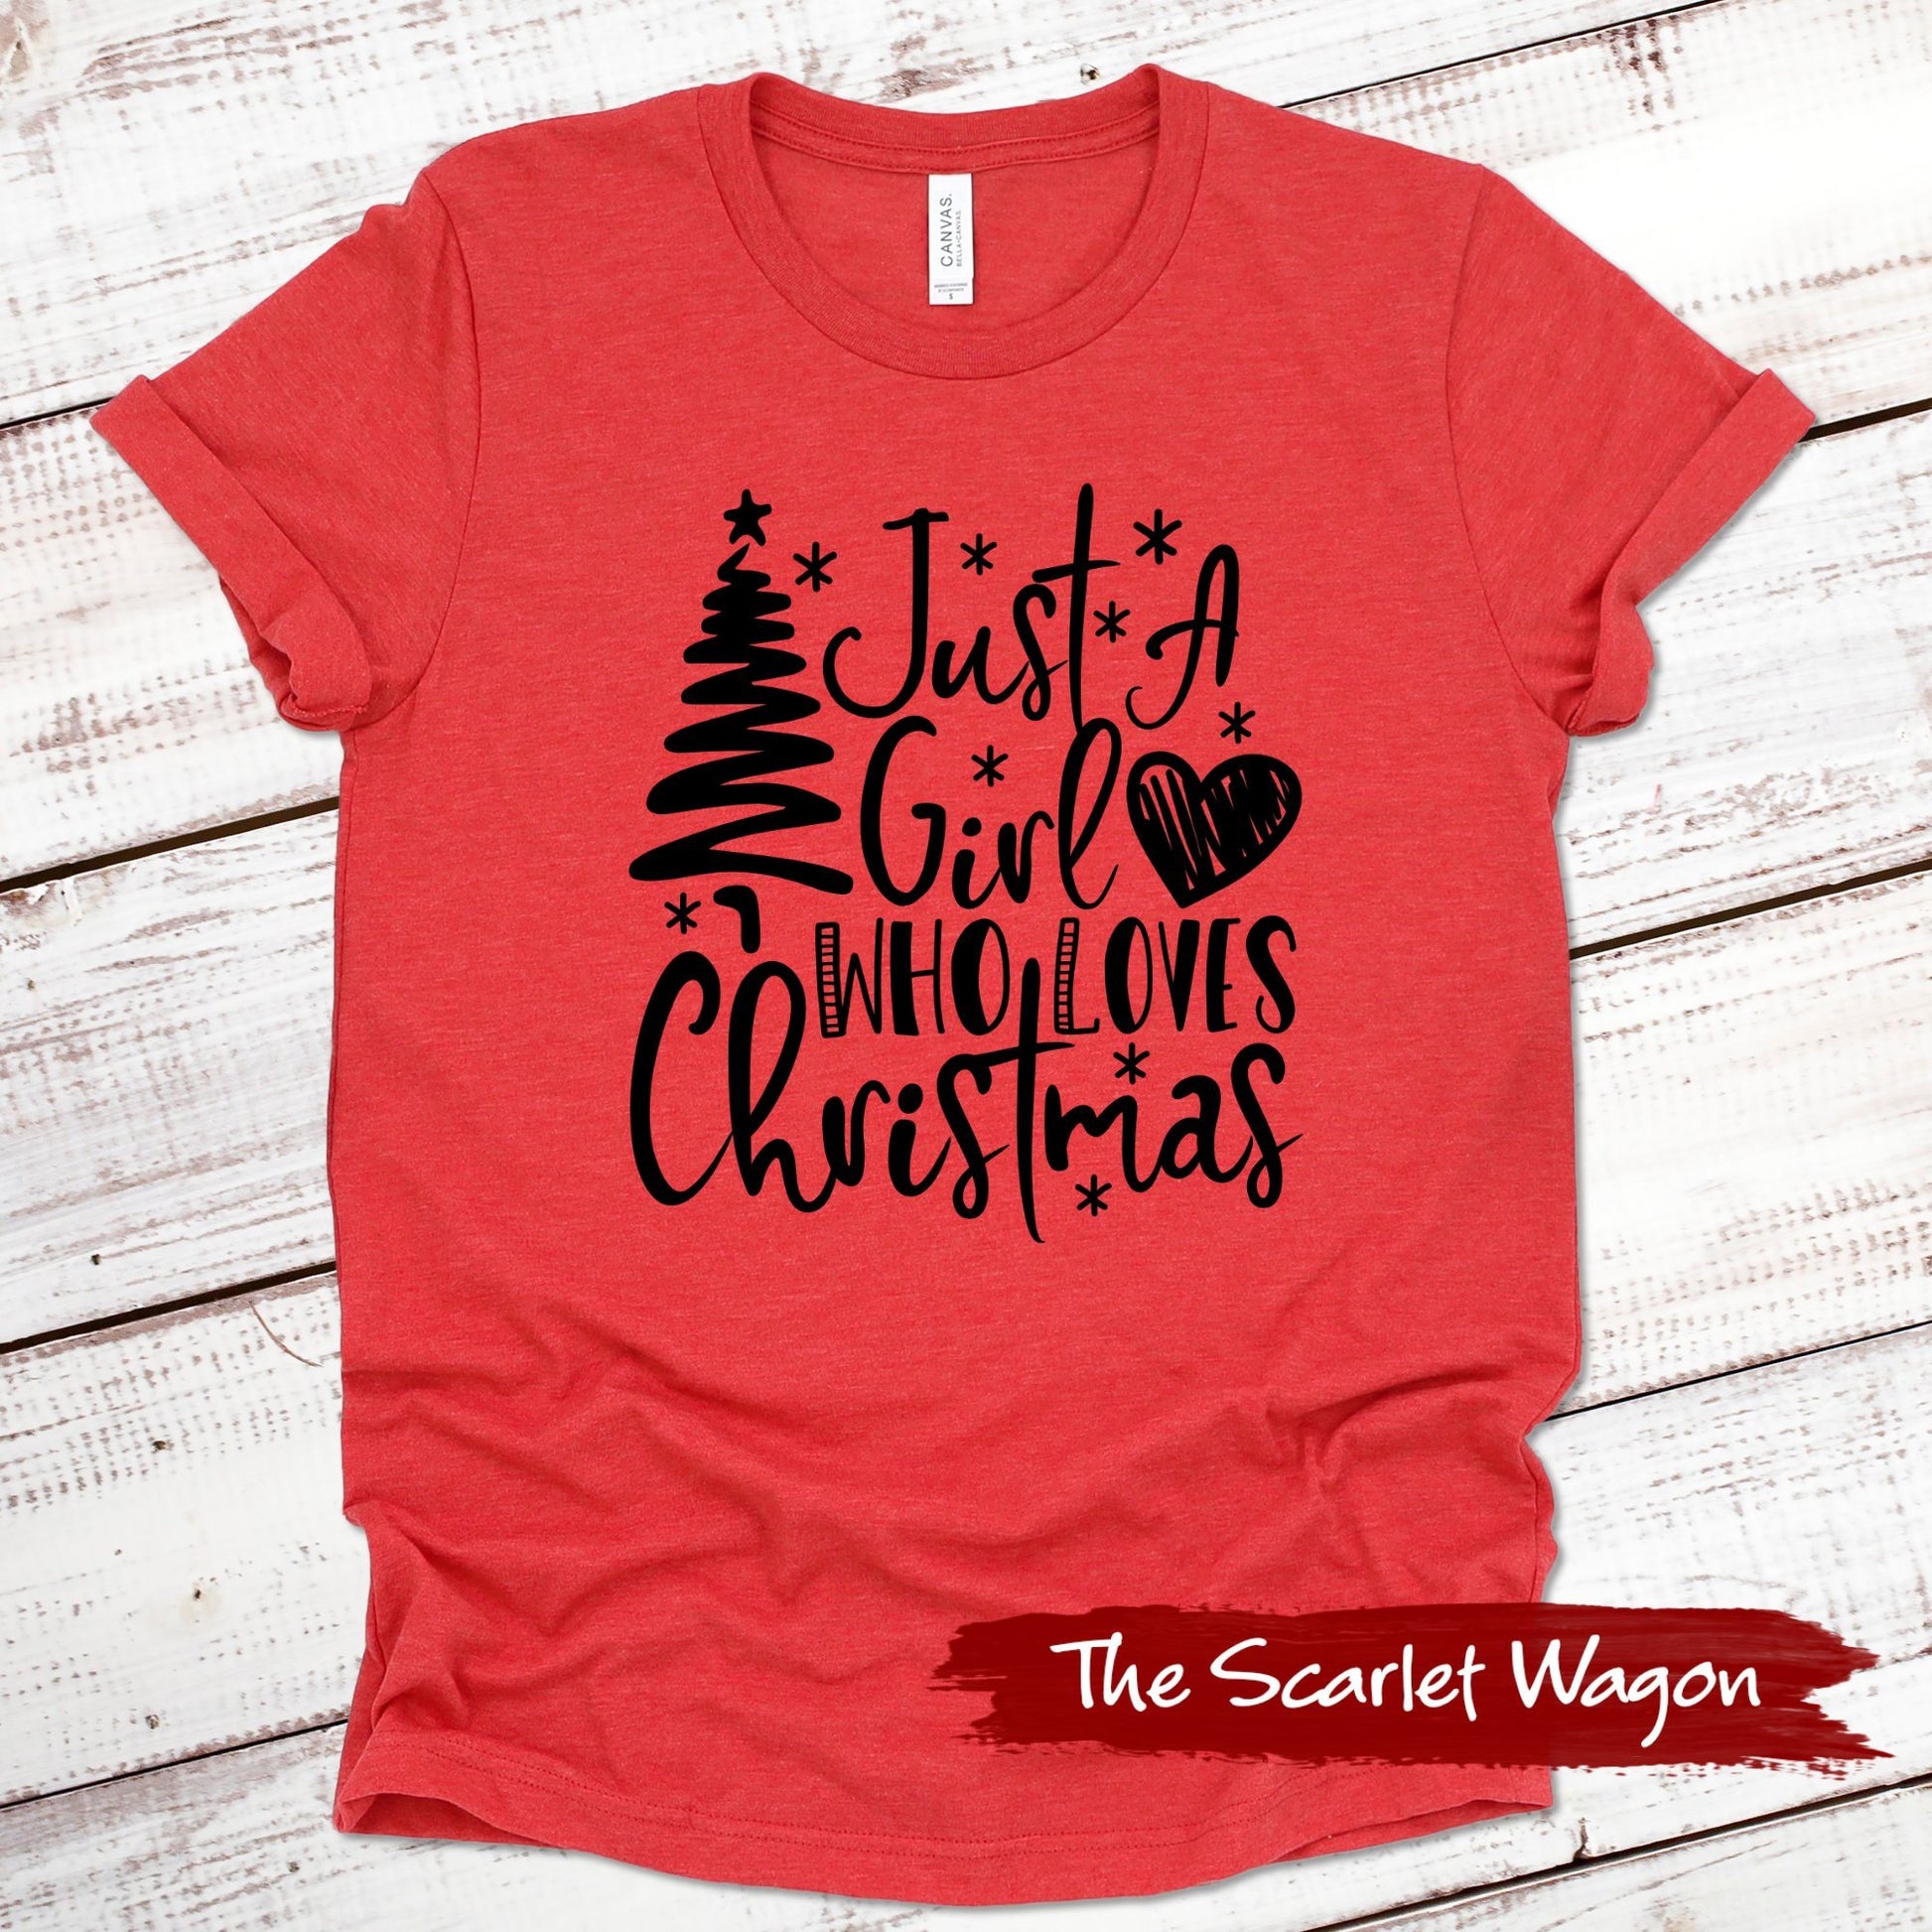 Just a Girl Who Loves Christmas Christmas Shirt Scarlet Wagon Heather Red XS 